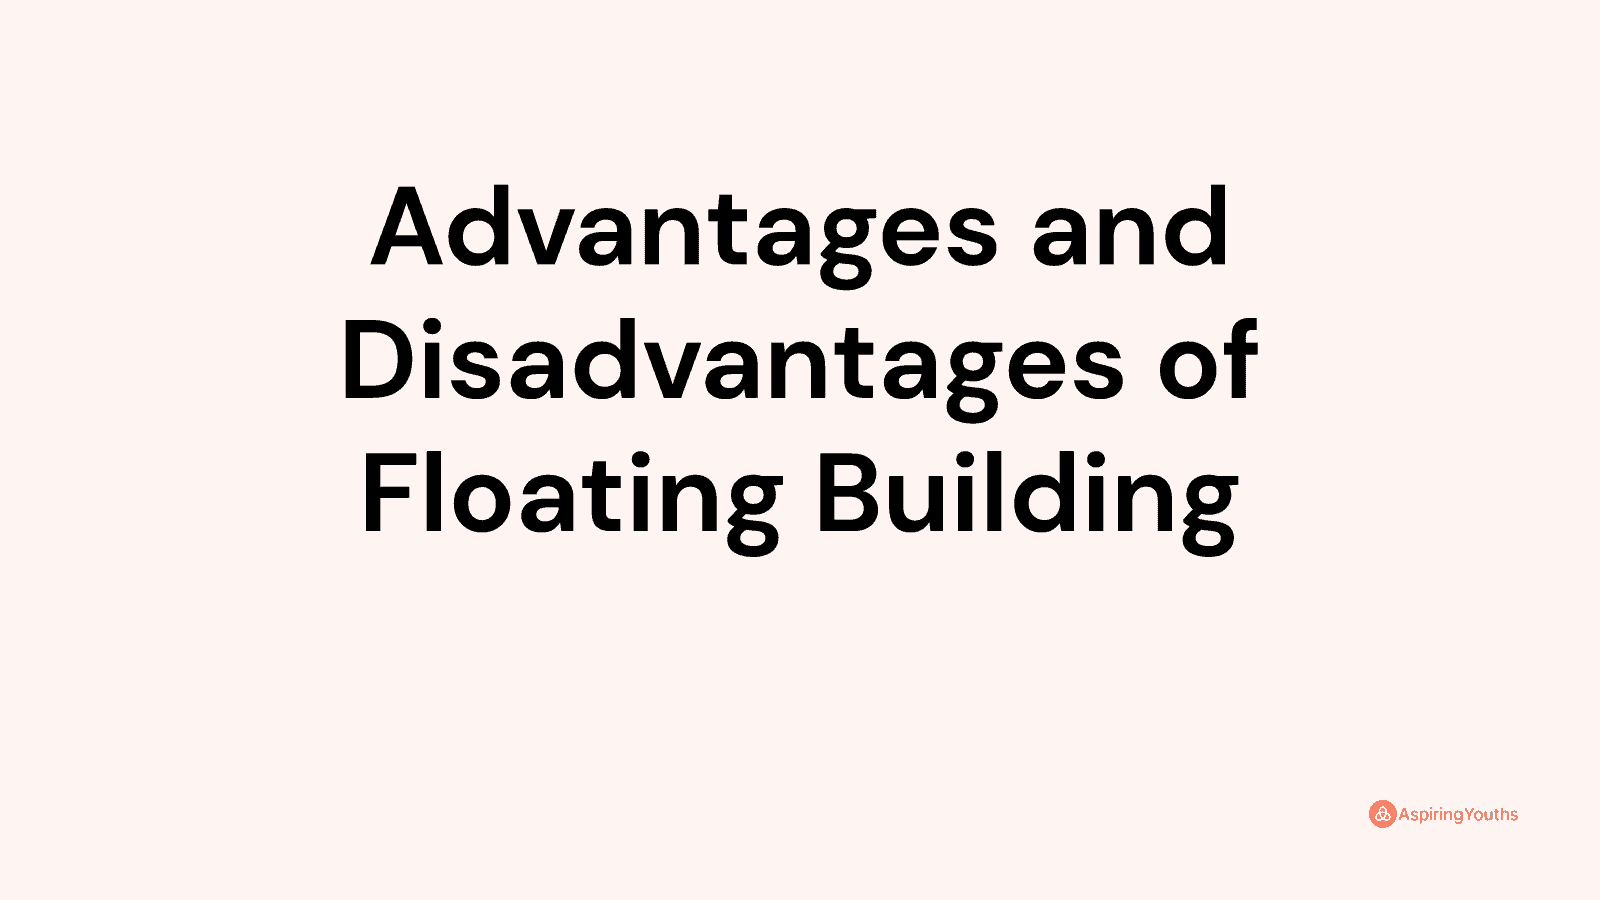 Advantages and disadvantages of Floating Building